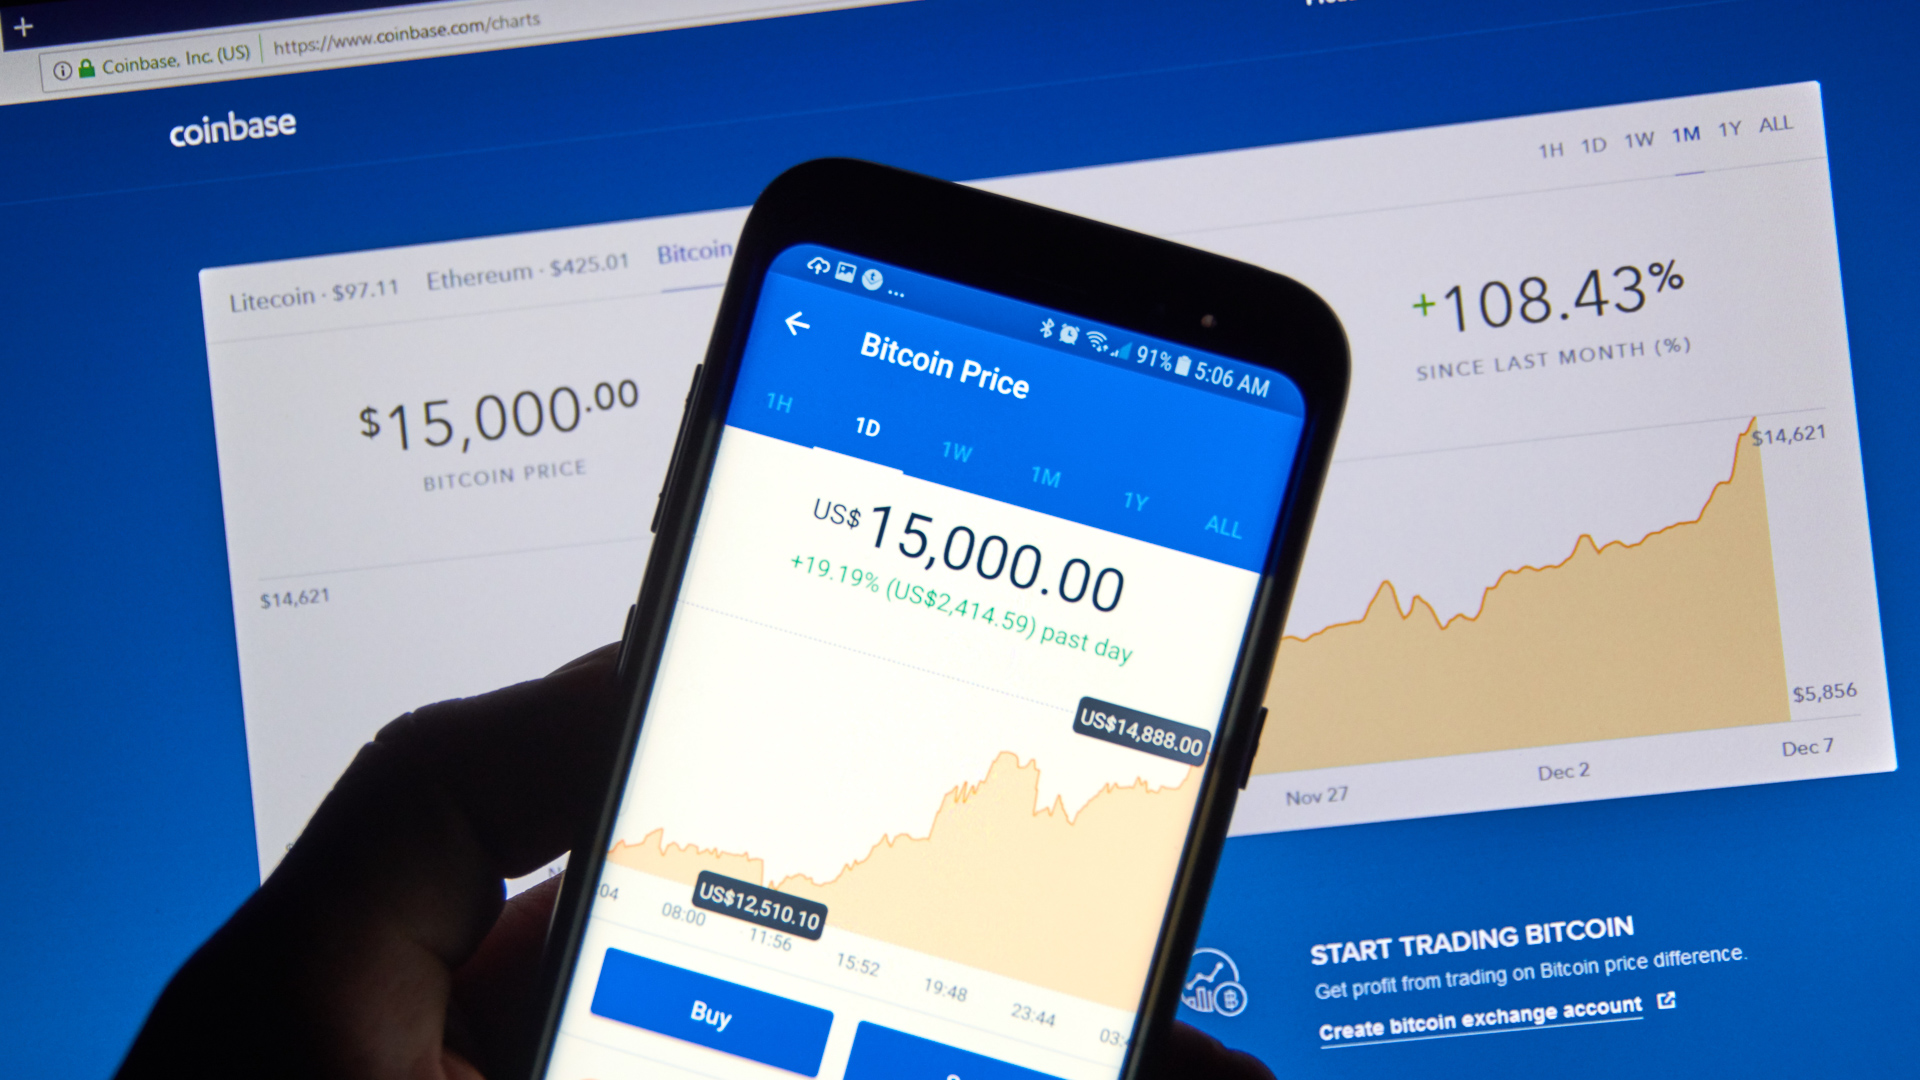 what is going on with coinbase